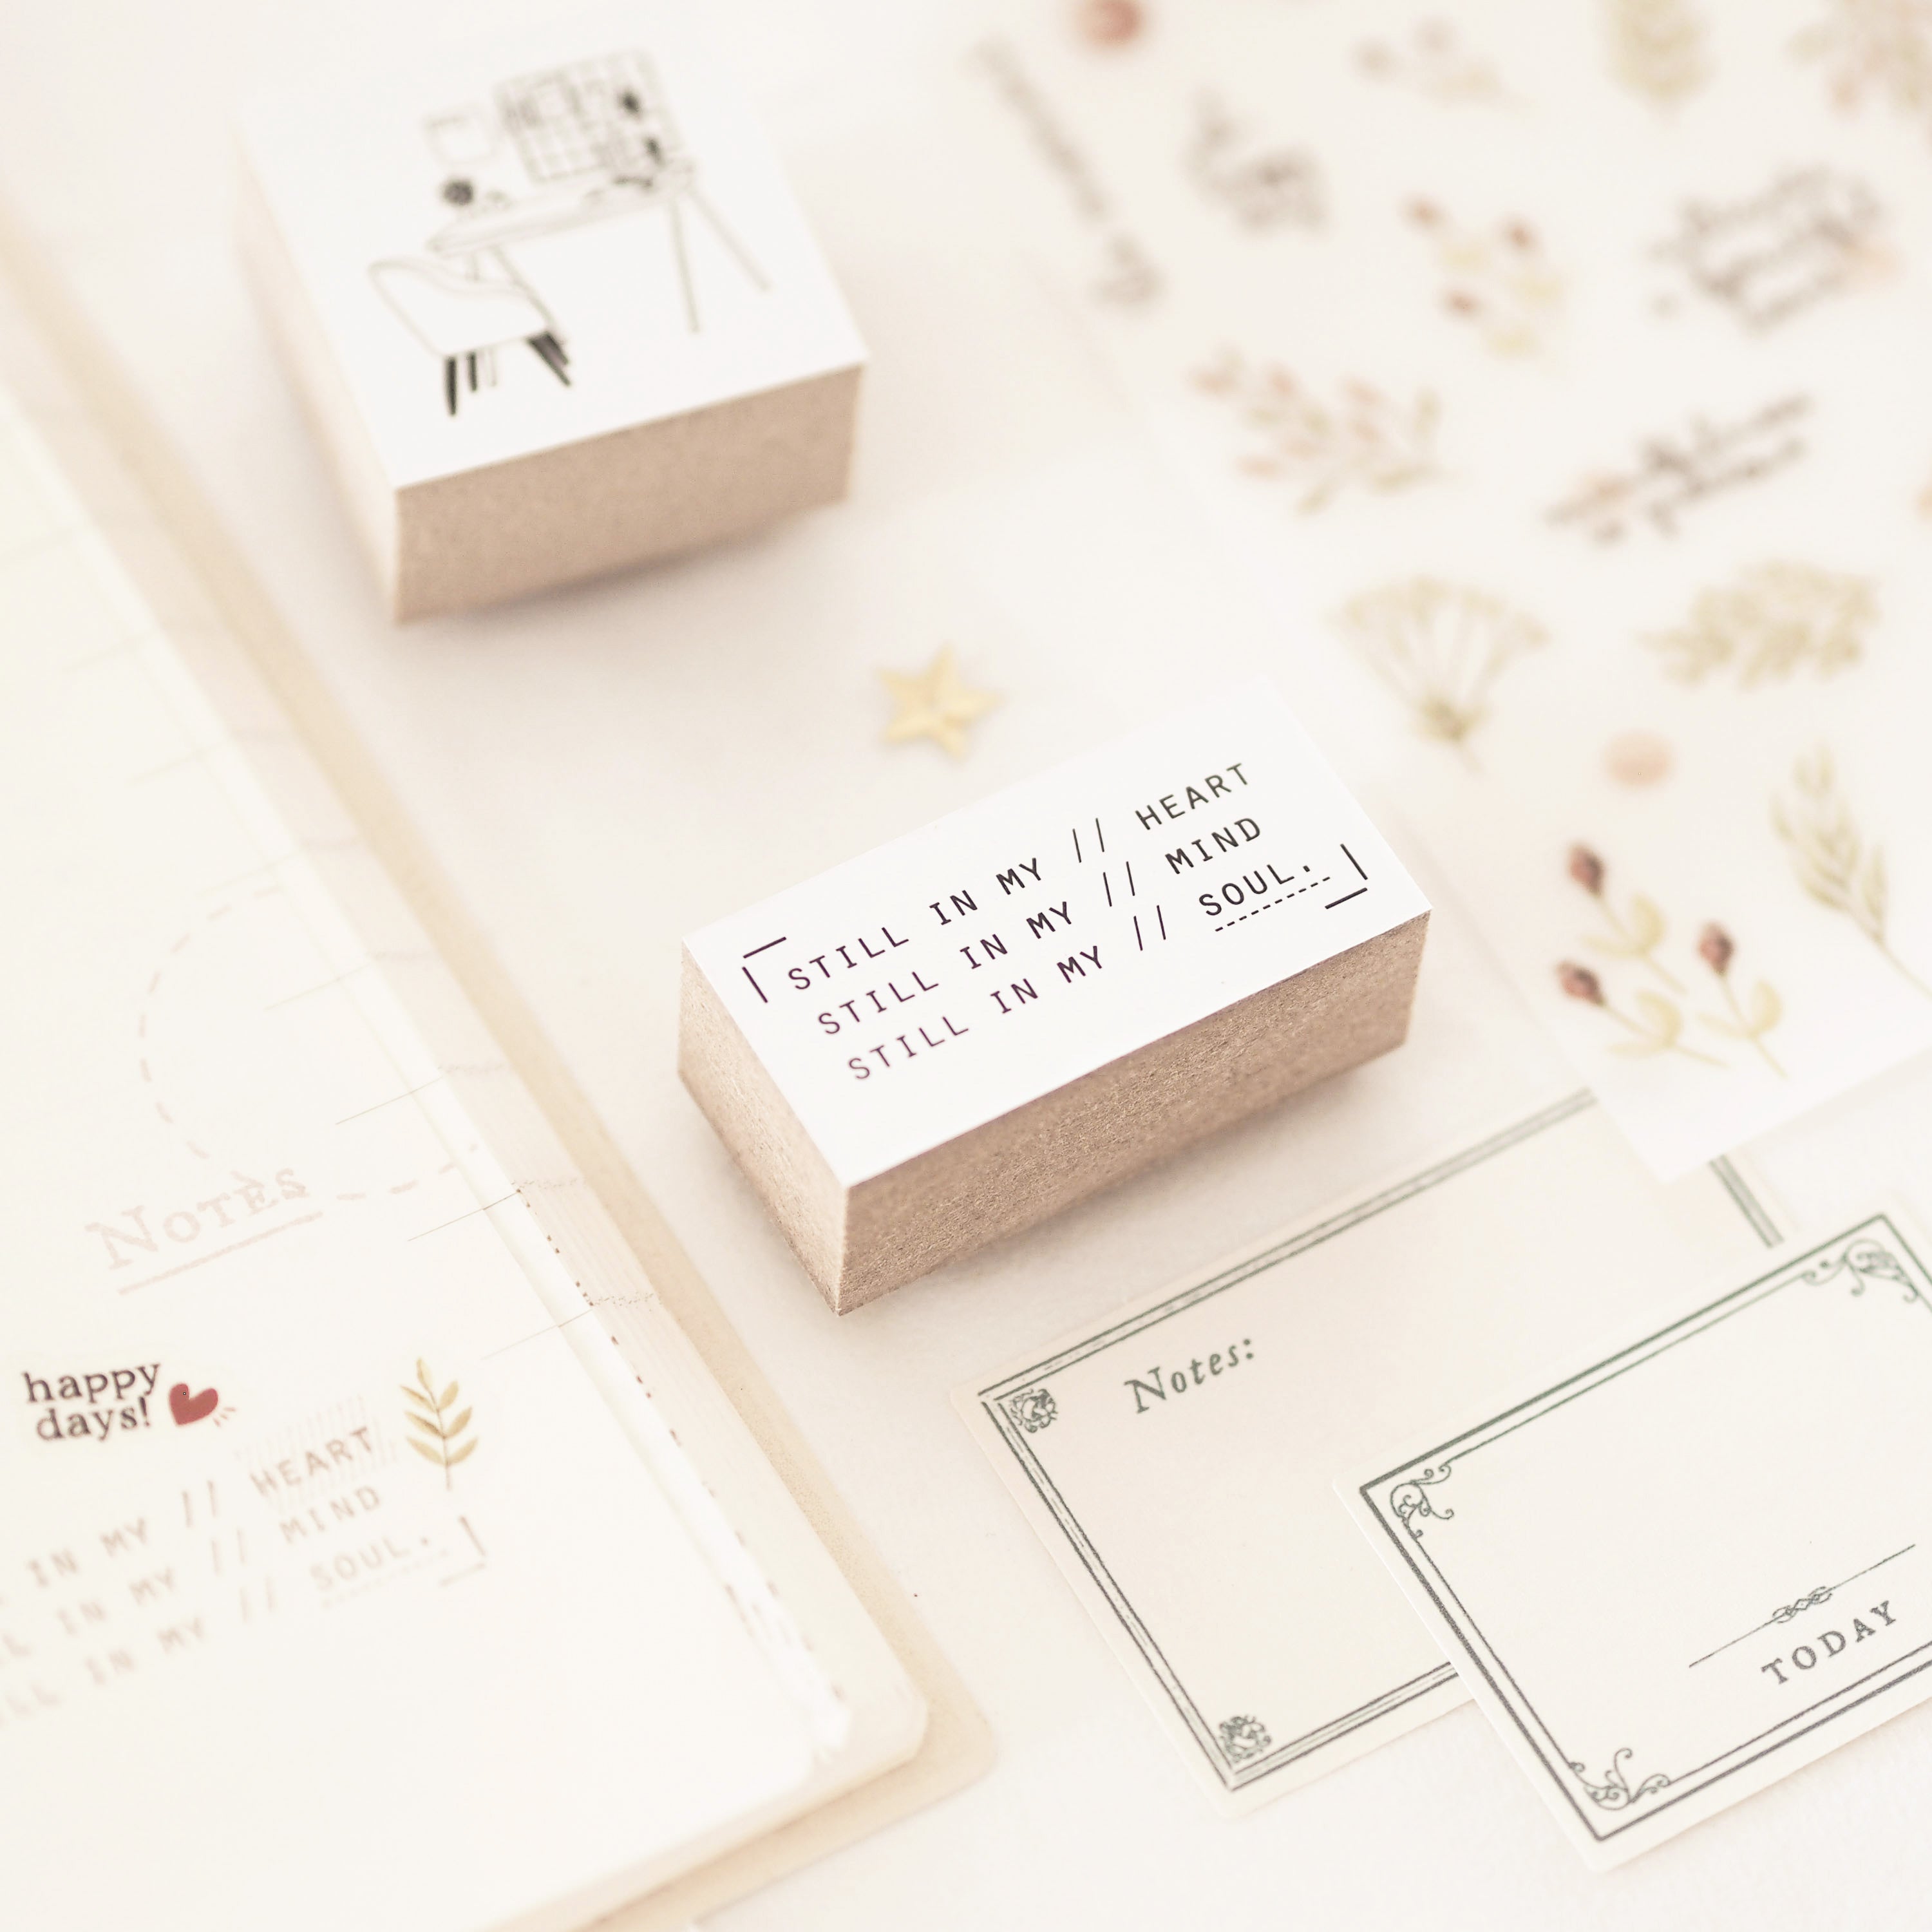 Blinks of Life - Rubber Stamps, Stationery, Journal, Crafts